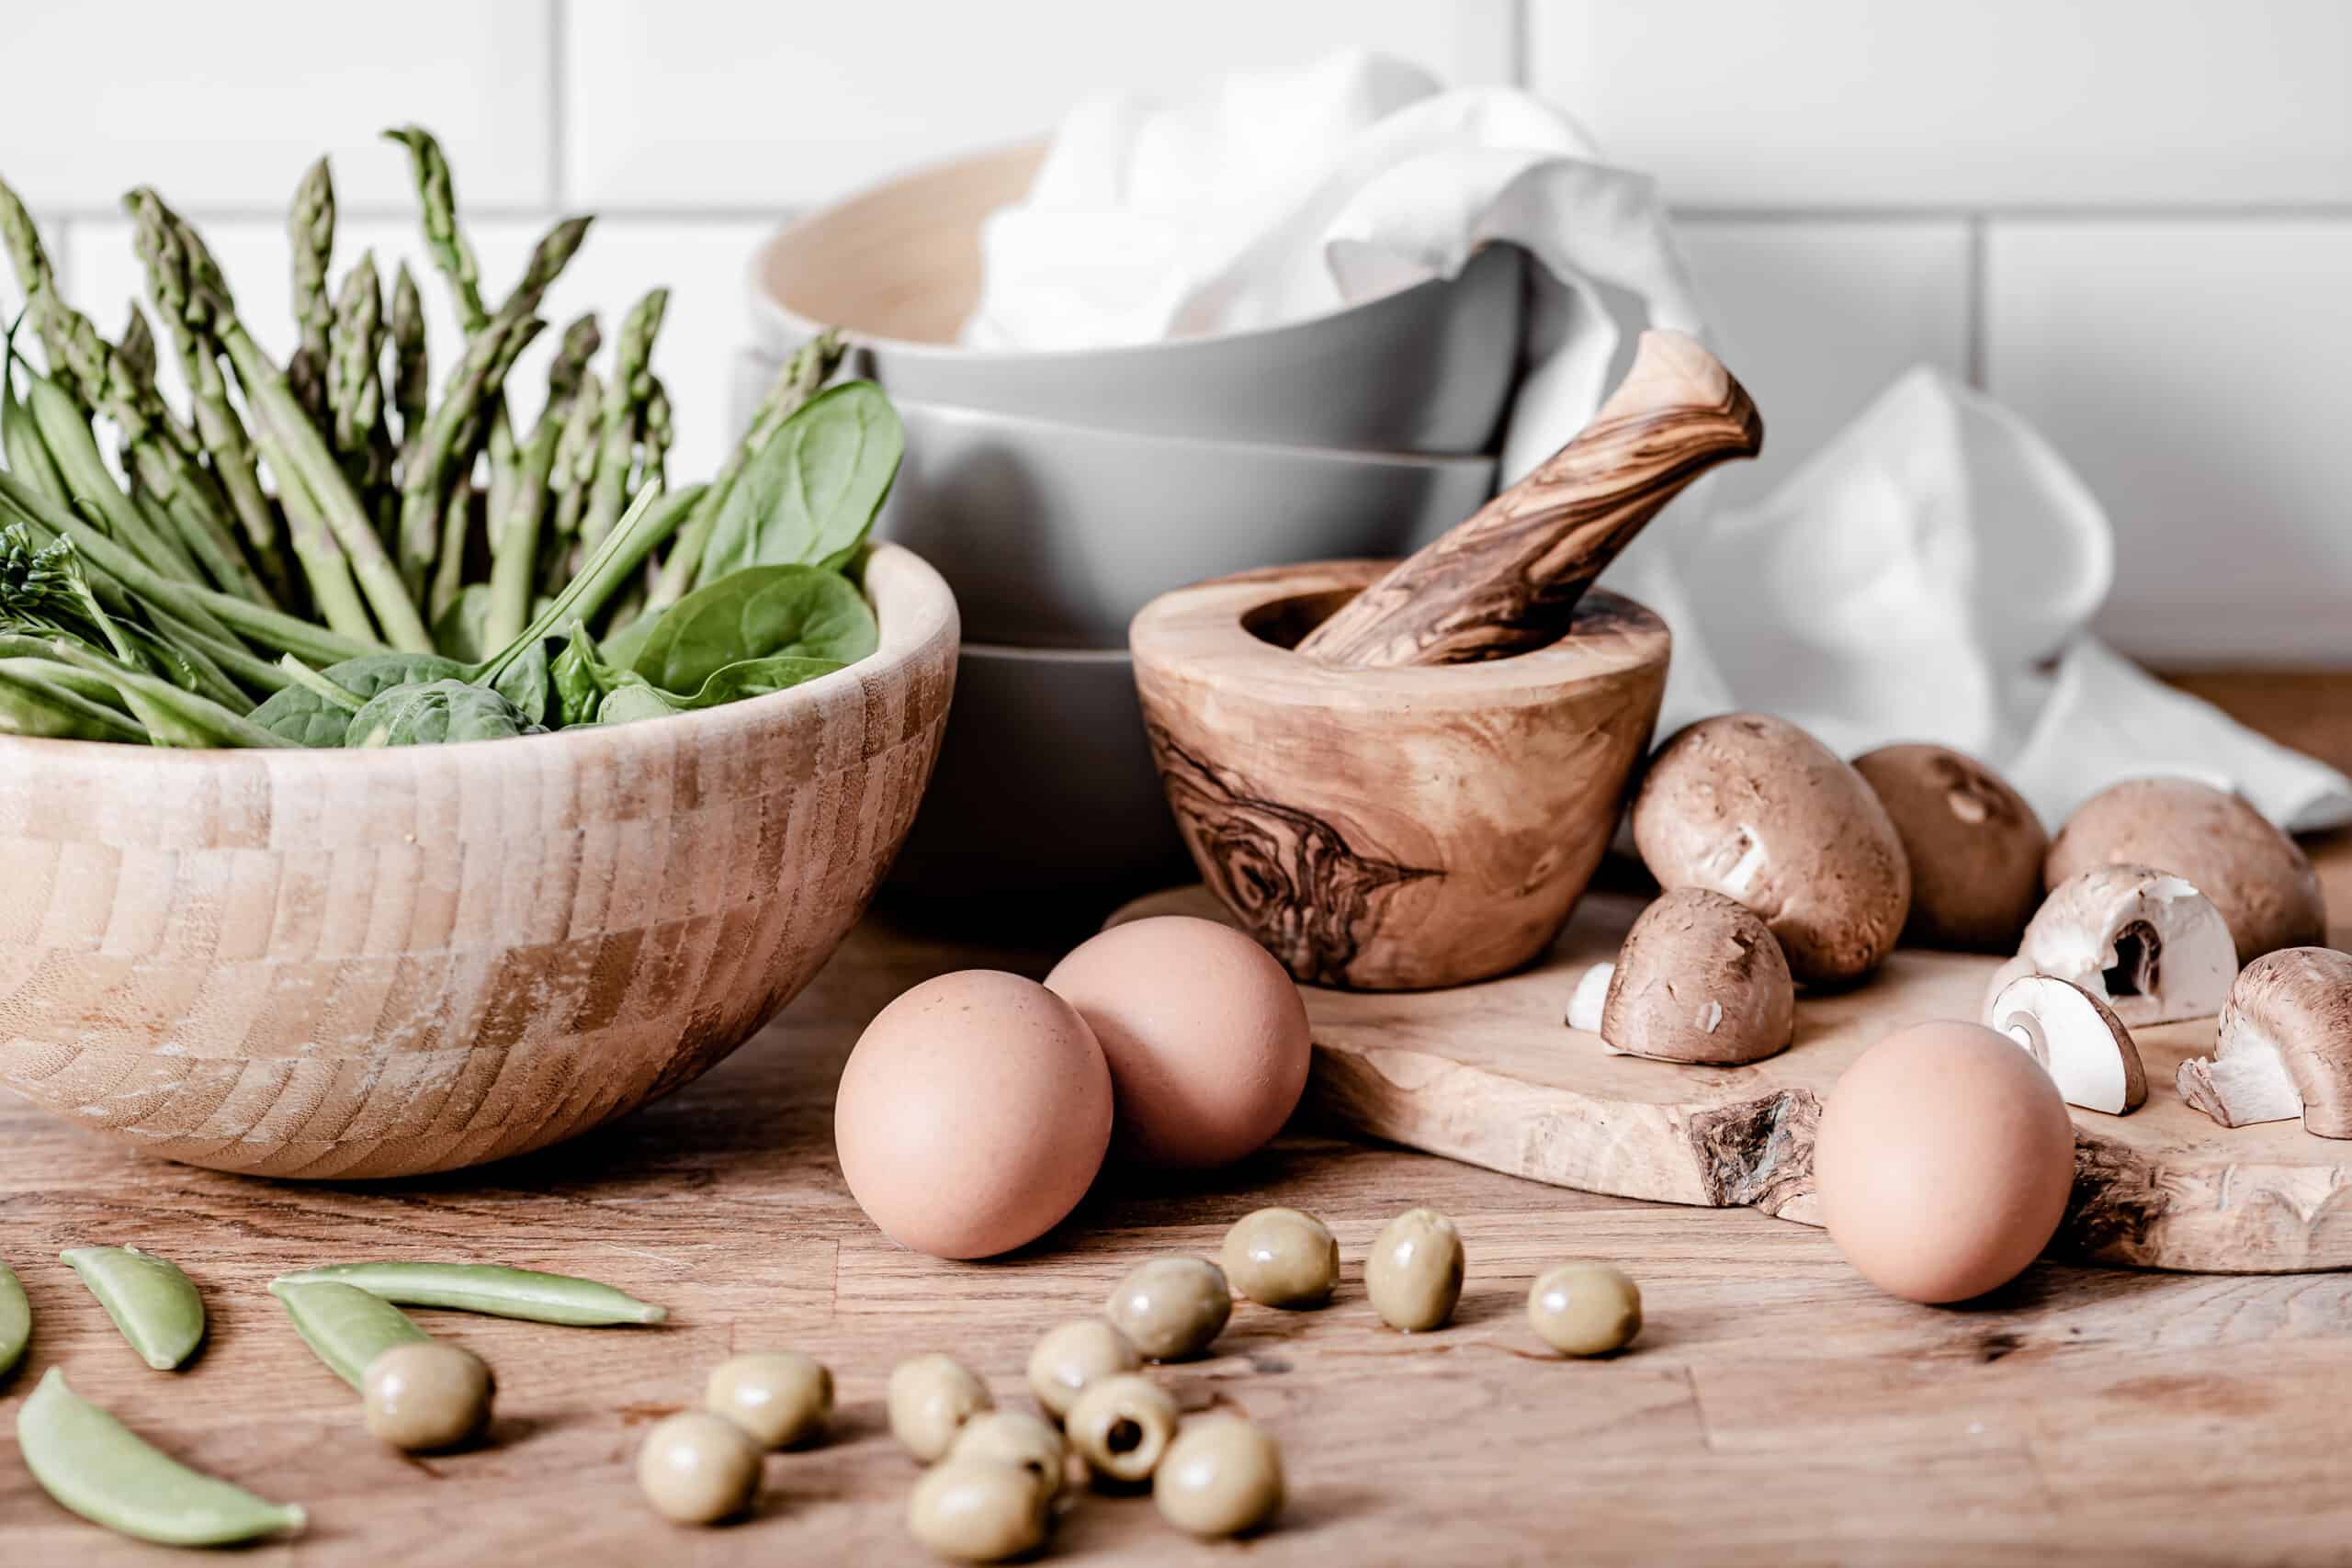 kitchen counter with a bowl filled with spinach & asparagus, eggs, olives, mushrooms, mortal and pestal, bowls, and cloth napkins - Copy